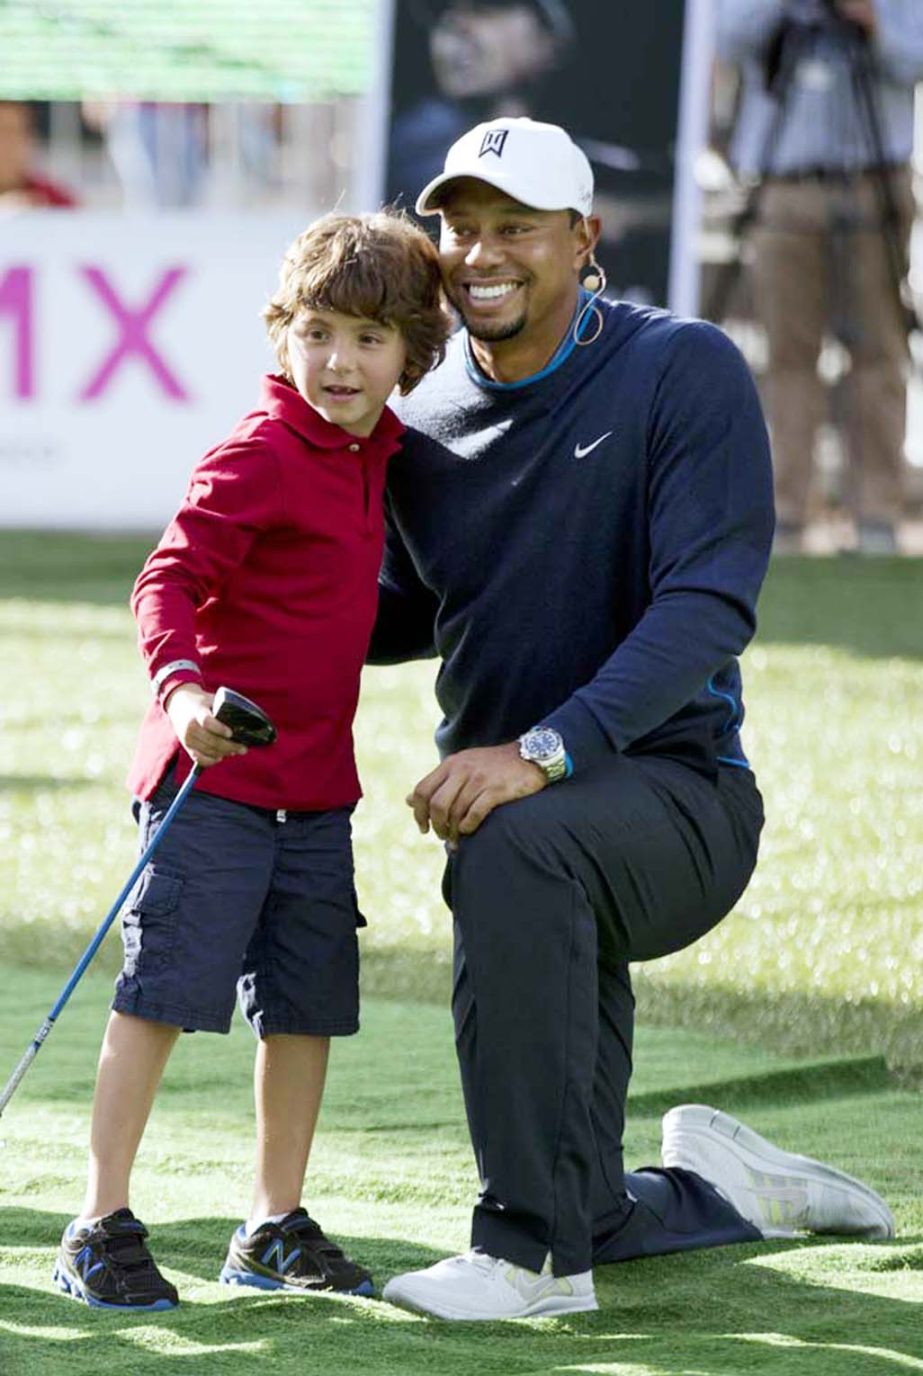 Tiger Woods poses with a young golfer after working with him during a promotional golf clinic for the Bridgestone America's Golf Cup in Mexico City on Tuesday. Woods withdrew from the Bridgestone America's Golf Cup and two other events he had planned to